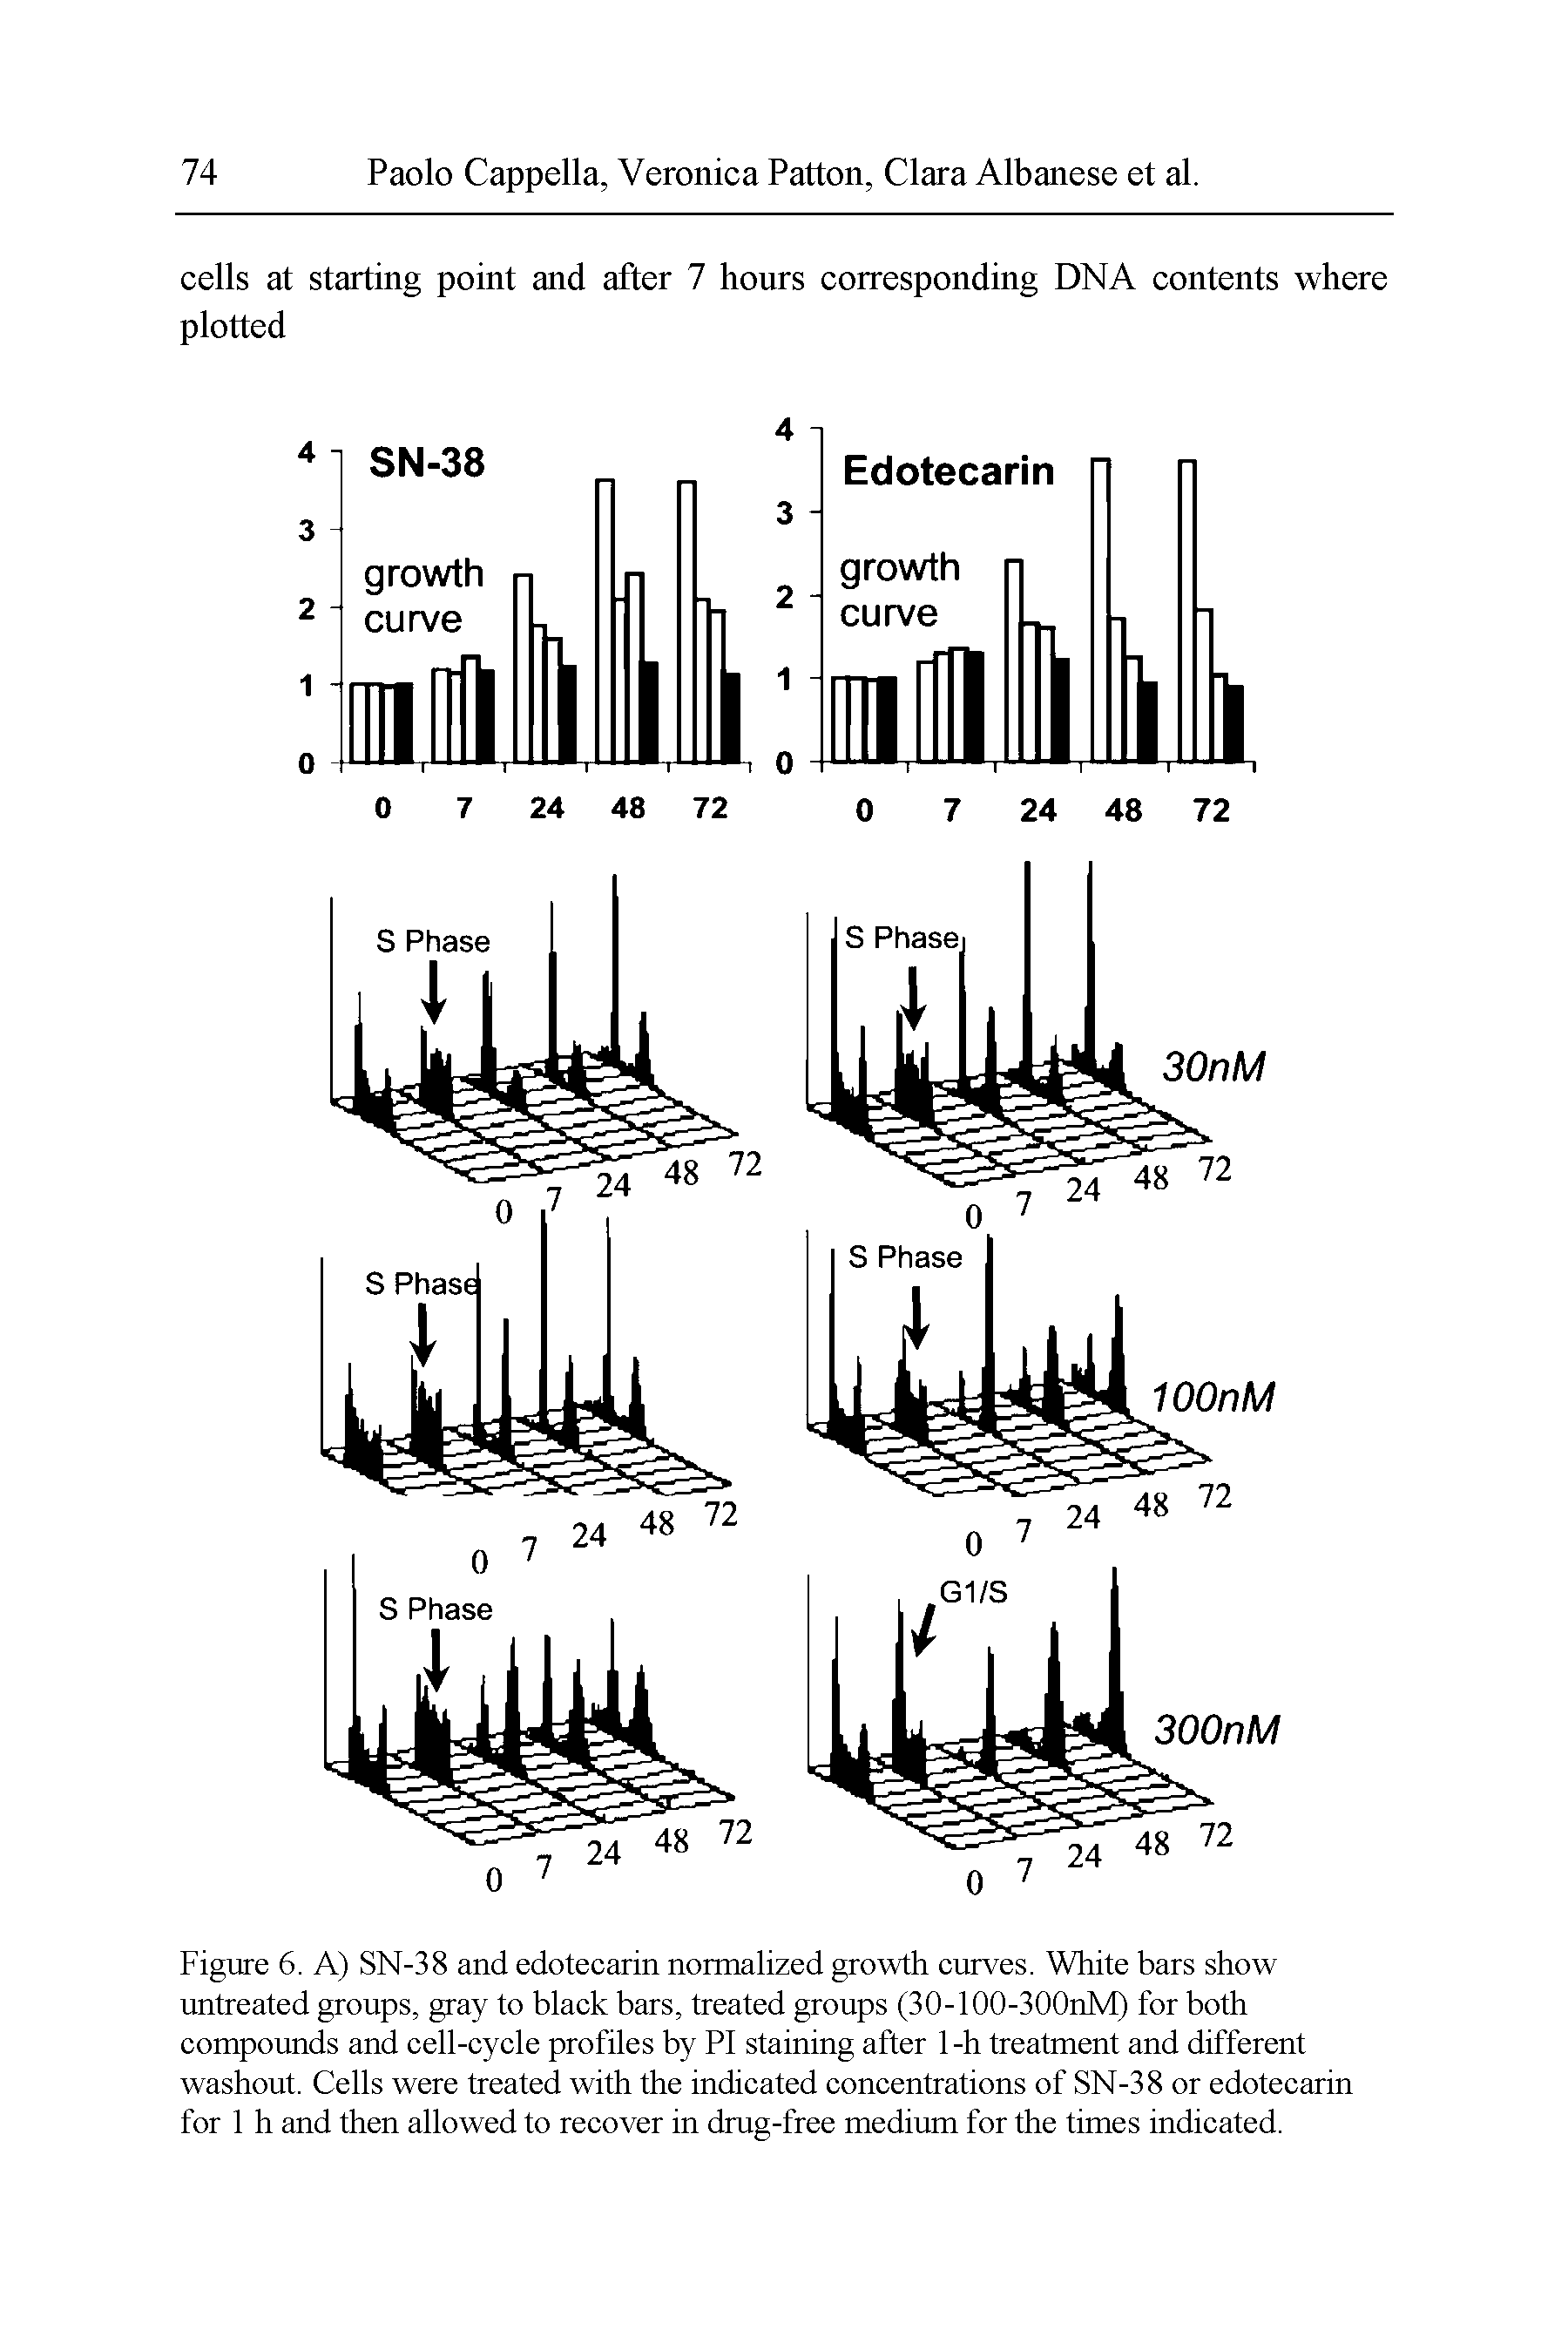 Figure 6. A) SN-38 and edotecarin normalized growth curves. White bars show untreated groups, gray to black bars, treated groups (30-100-300nM) for both compounds and cell-cycle profiles by PI staining after 1-h treatment and different washout. Cells were treated with the indicated concentrations of SN-38 or edotecarin for 1 h and then allowed to recover in drug-free medium for the times indicated.